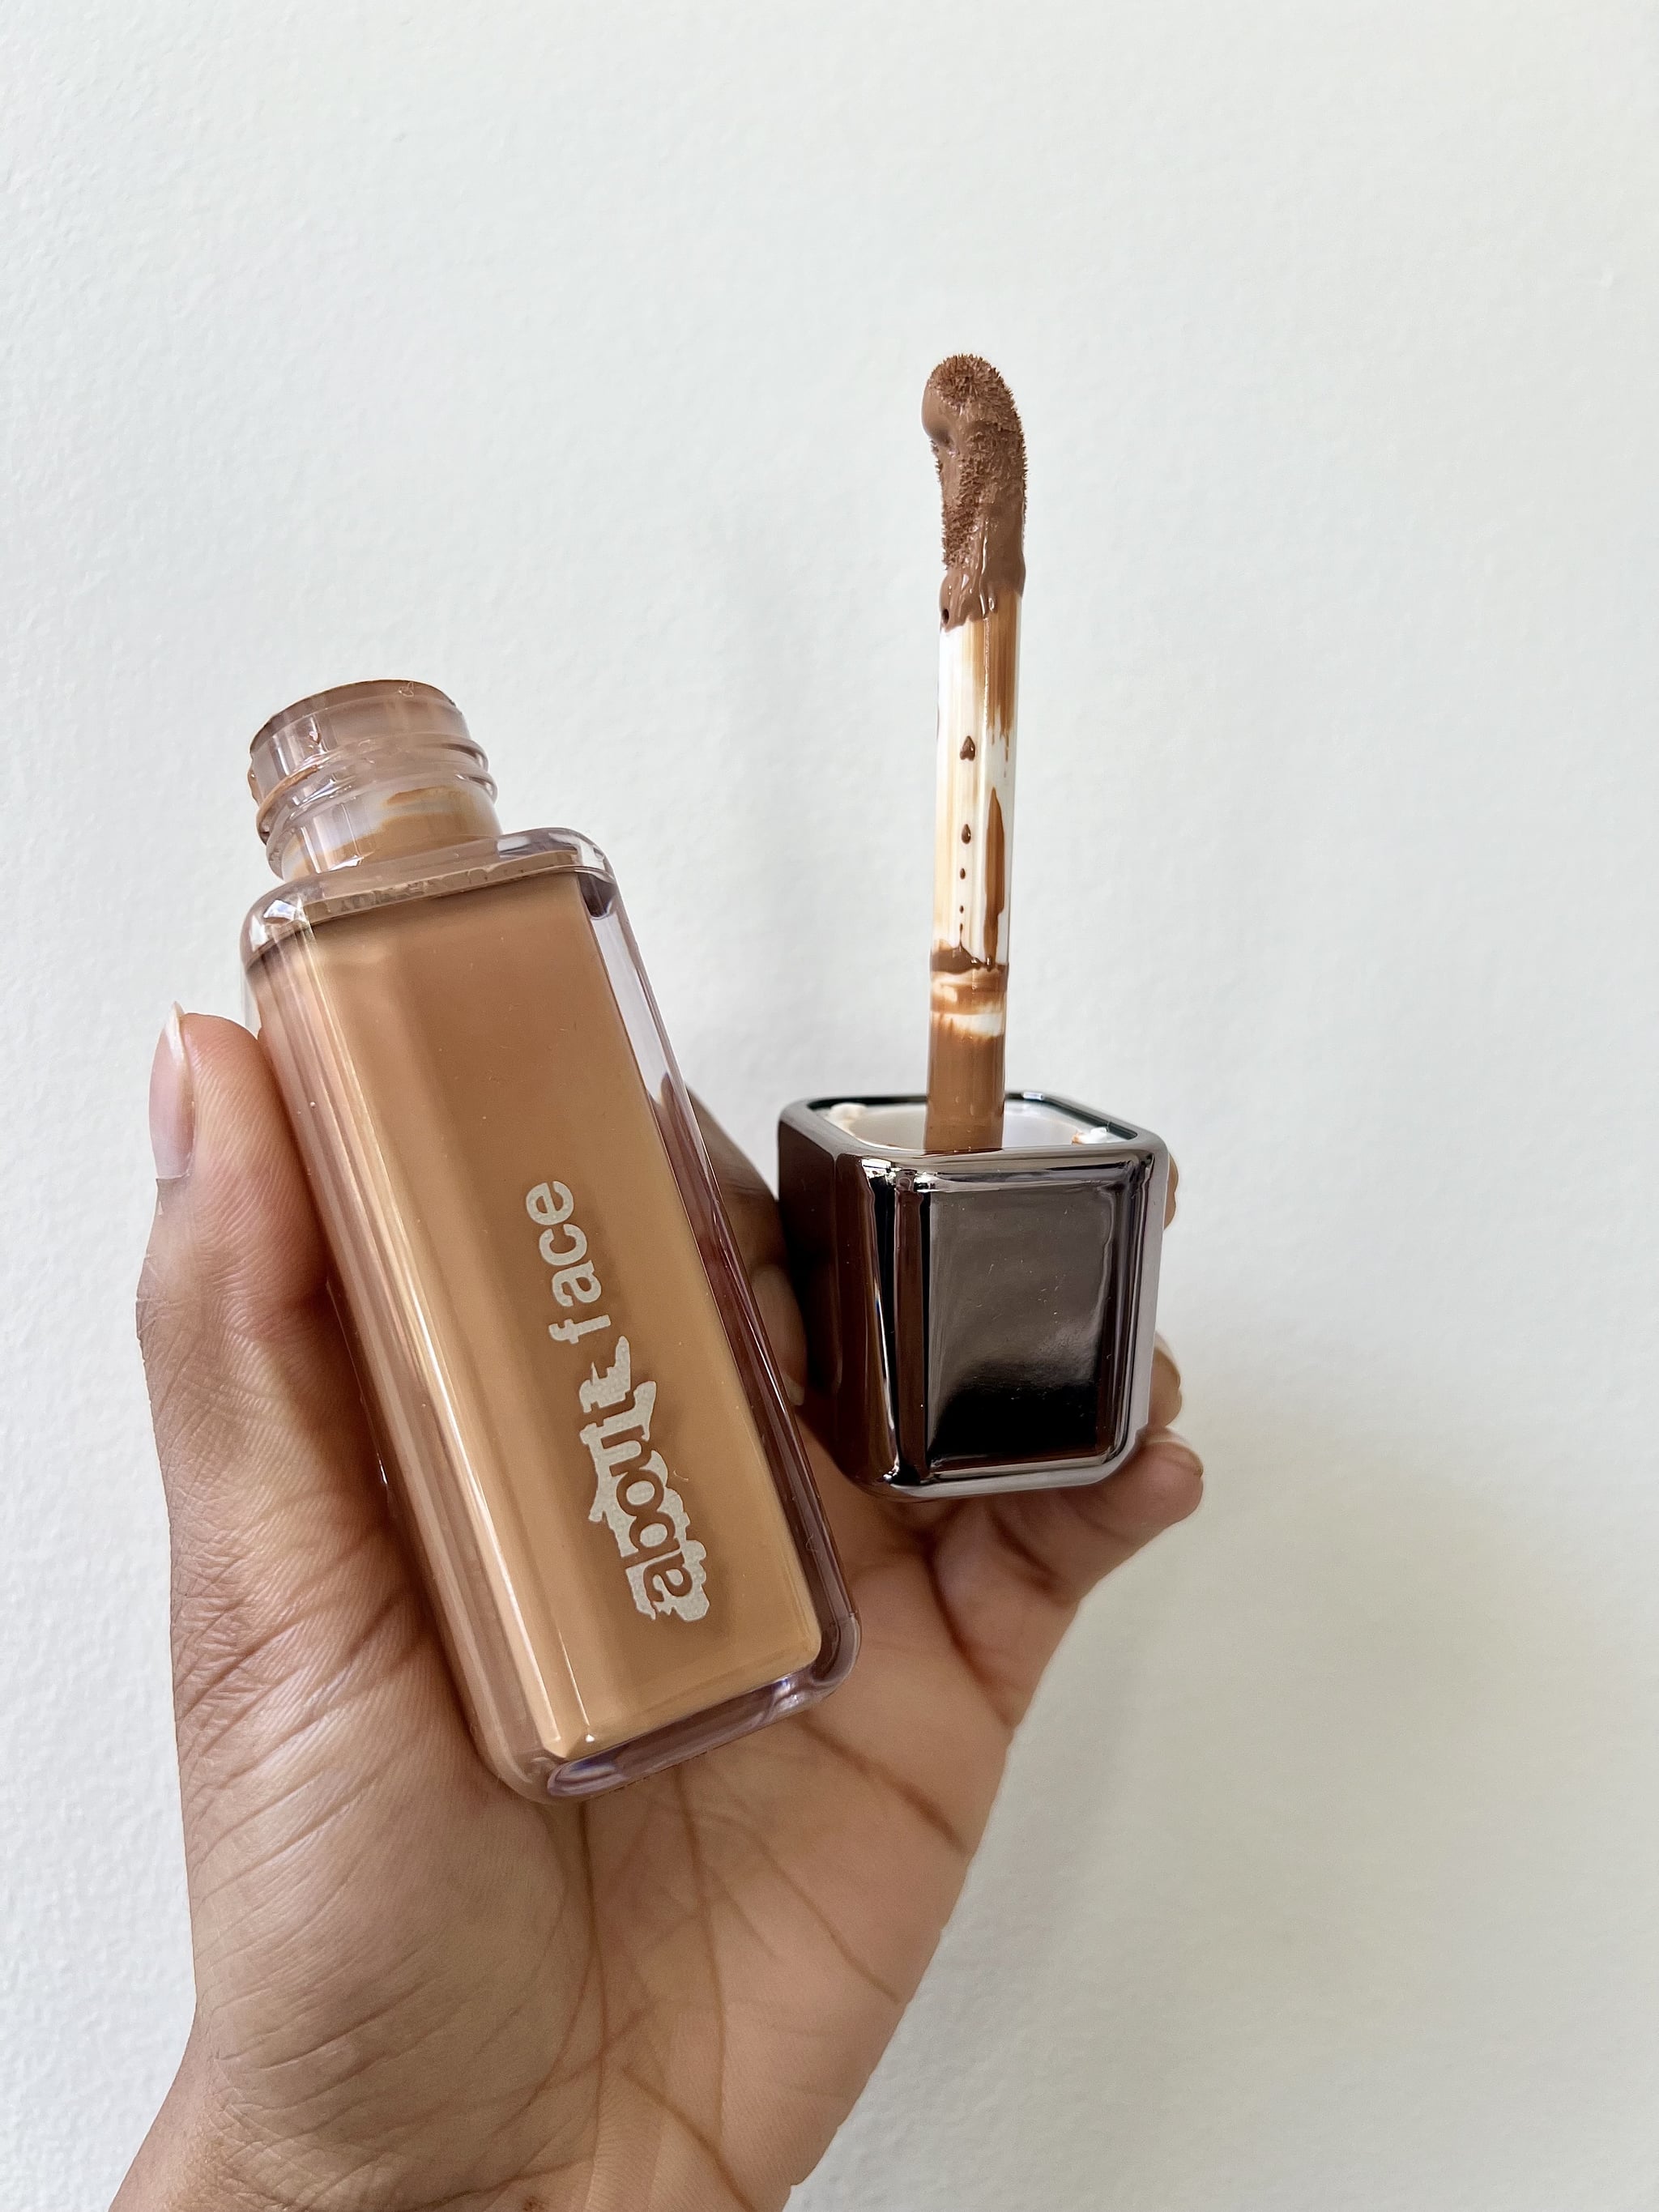 About Face's The Performer Skin-Focussed Foundation with the doe foot applicator.